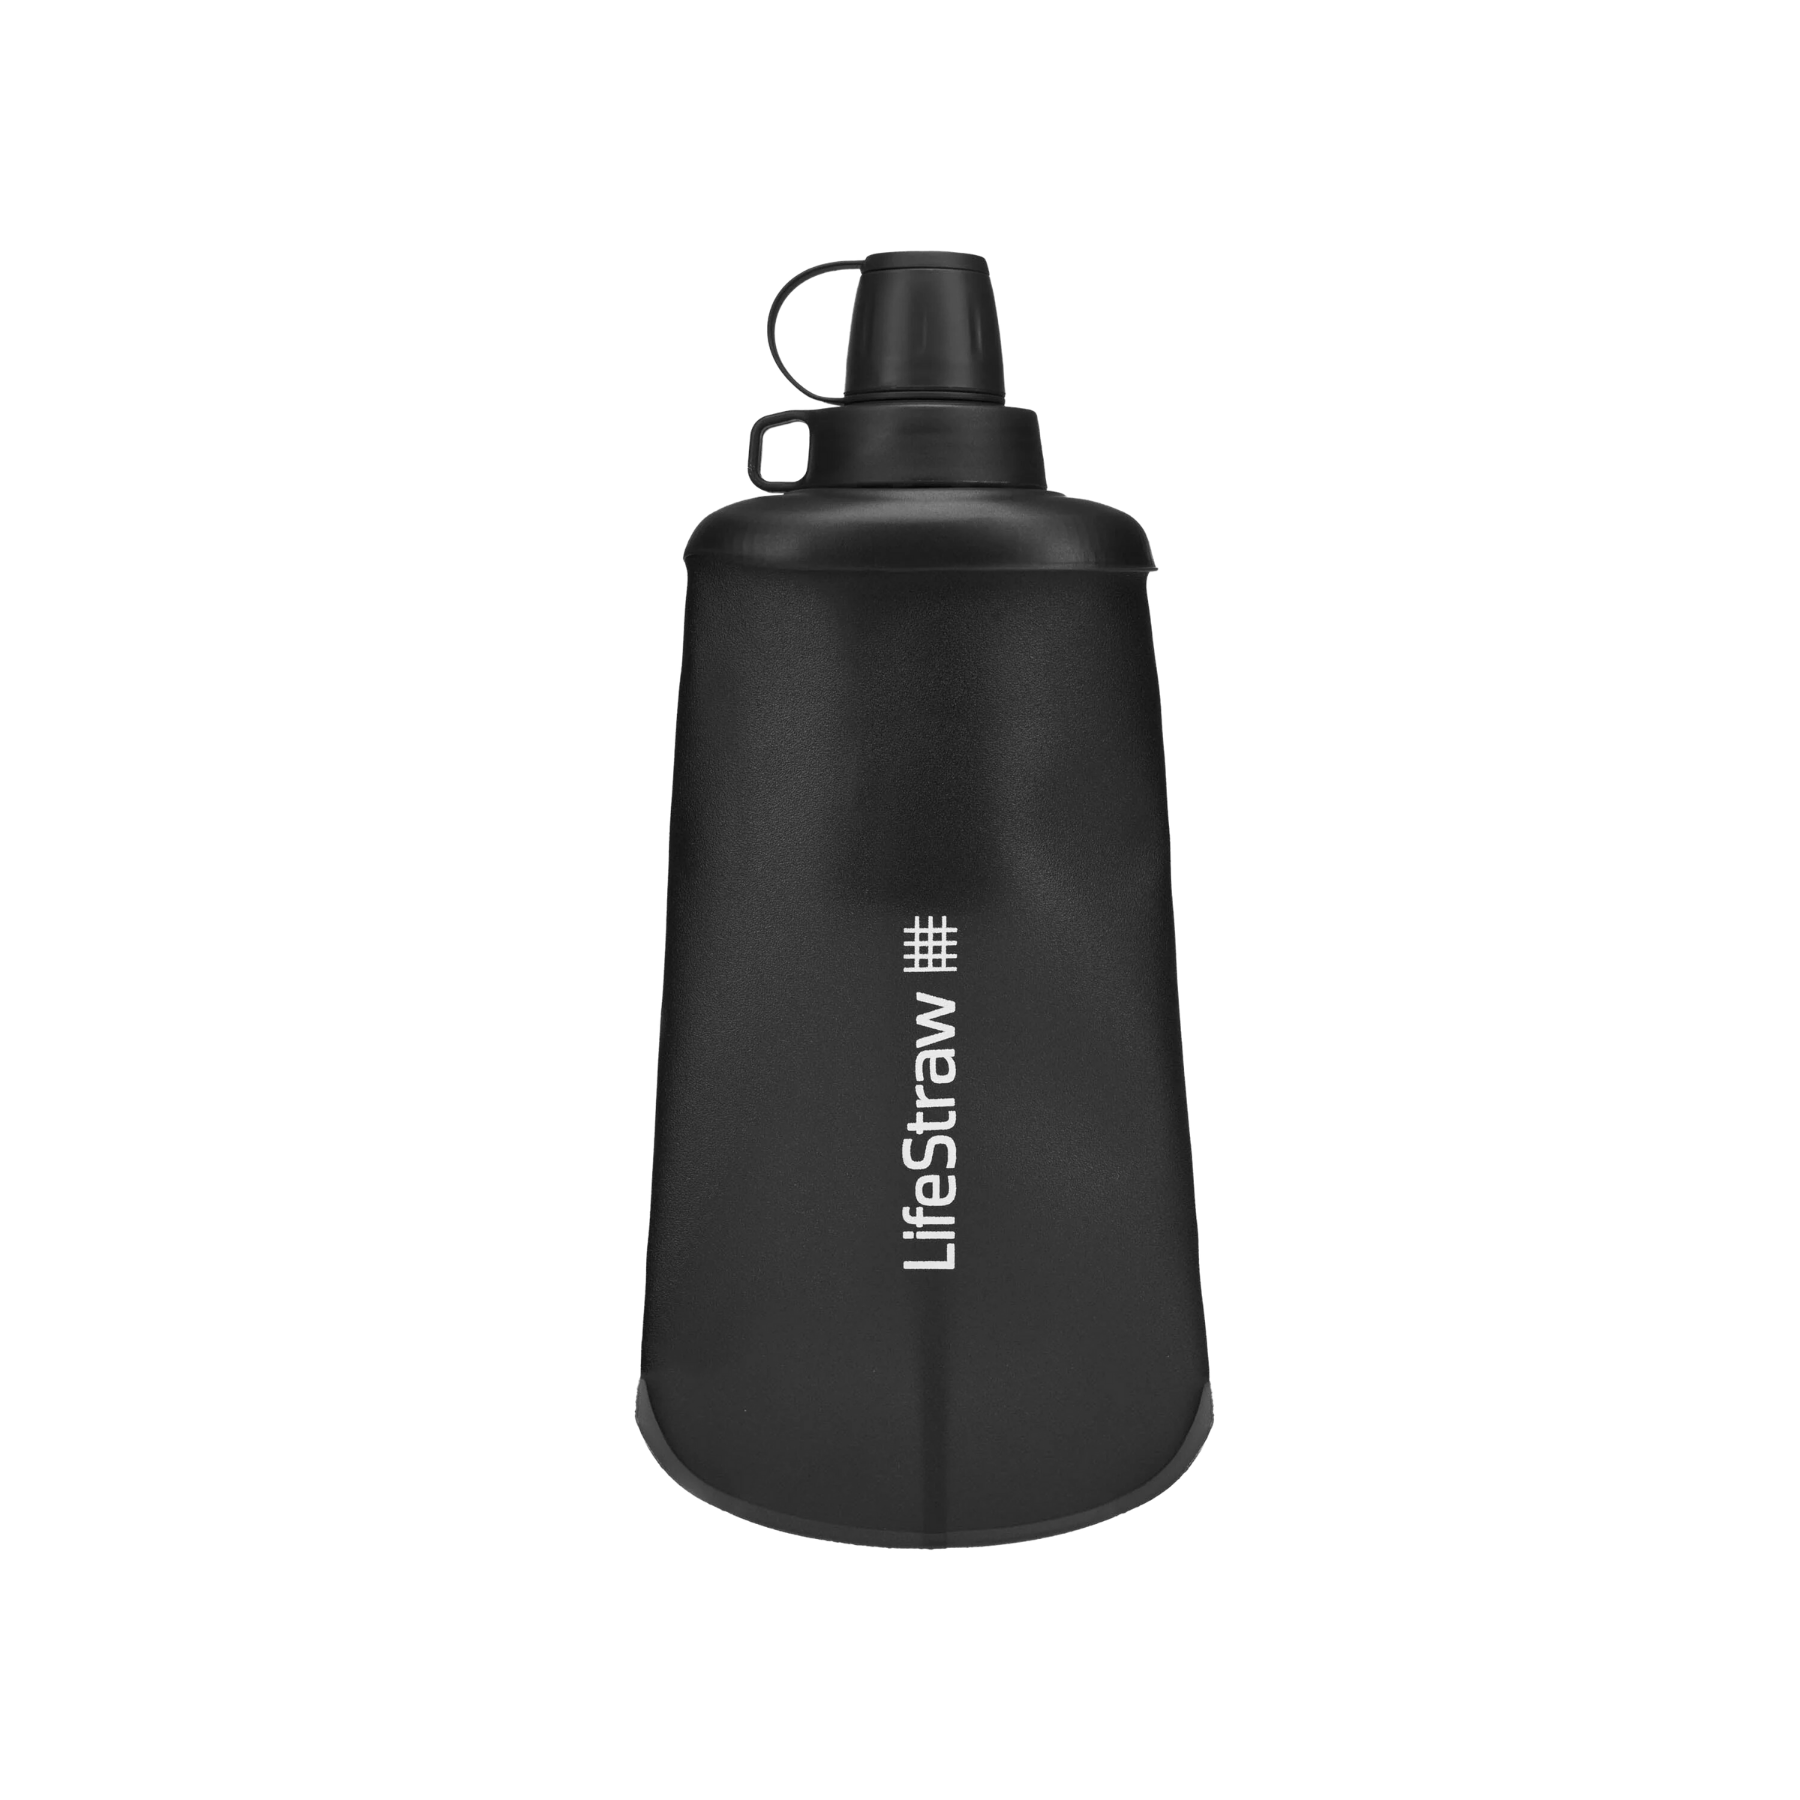 Lifestraw Water Treatment 650 ml / Dark Mountain Gray Collapsible Squeeze Bottle With Filter Peak Series